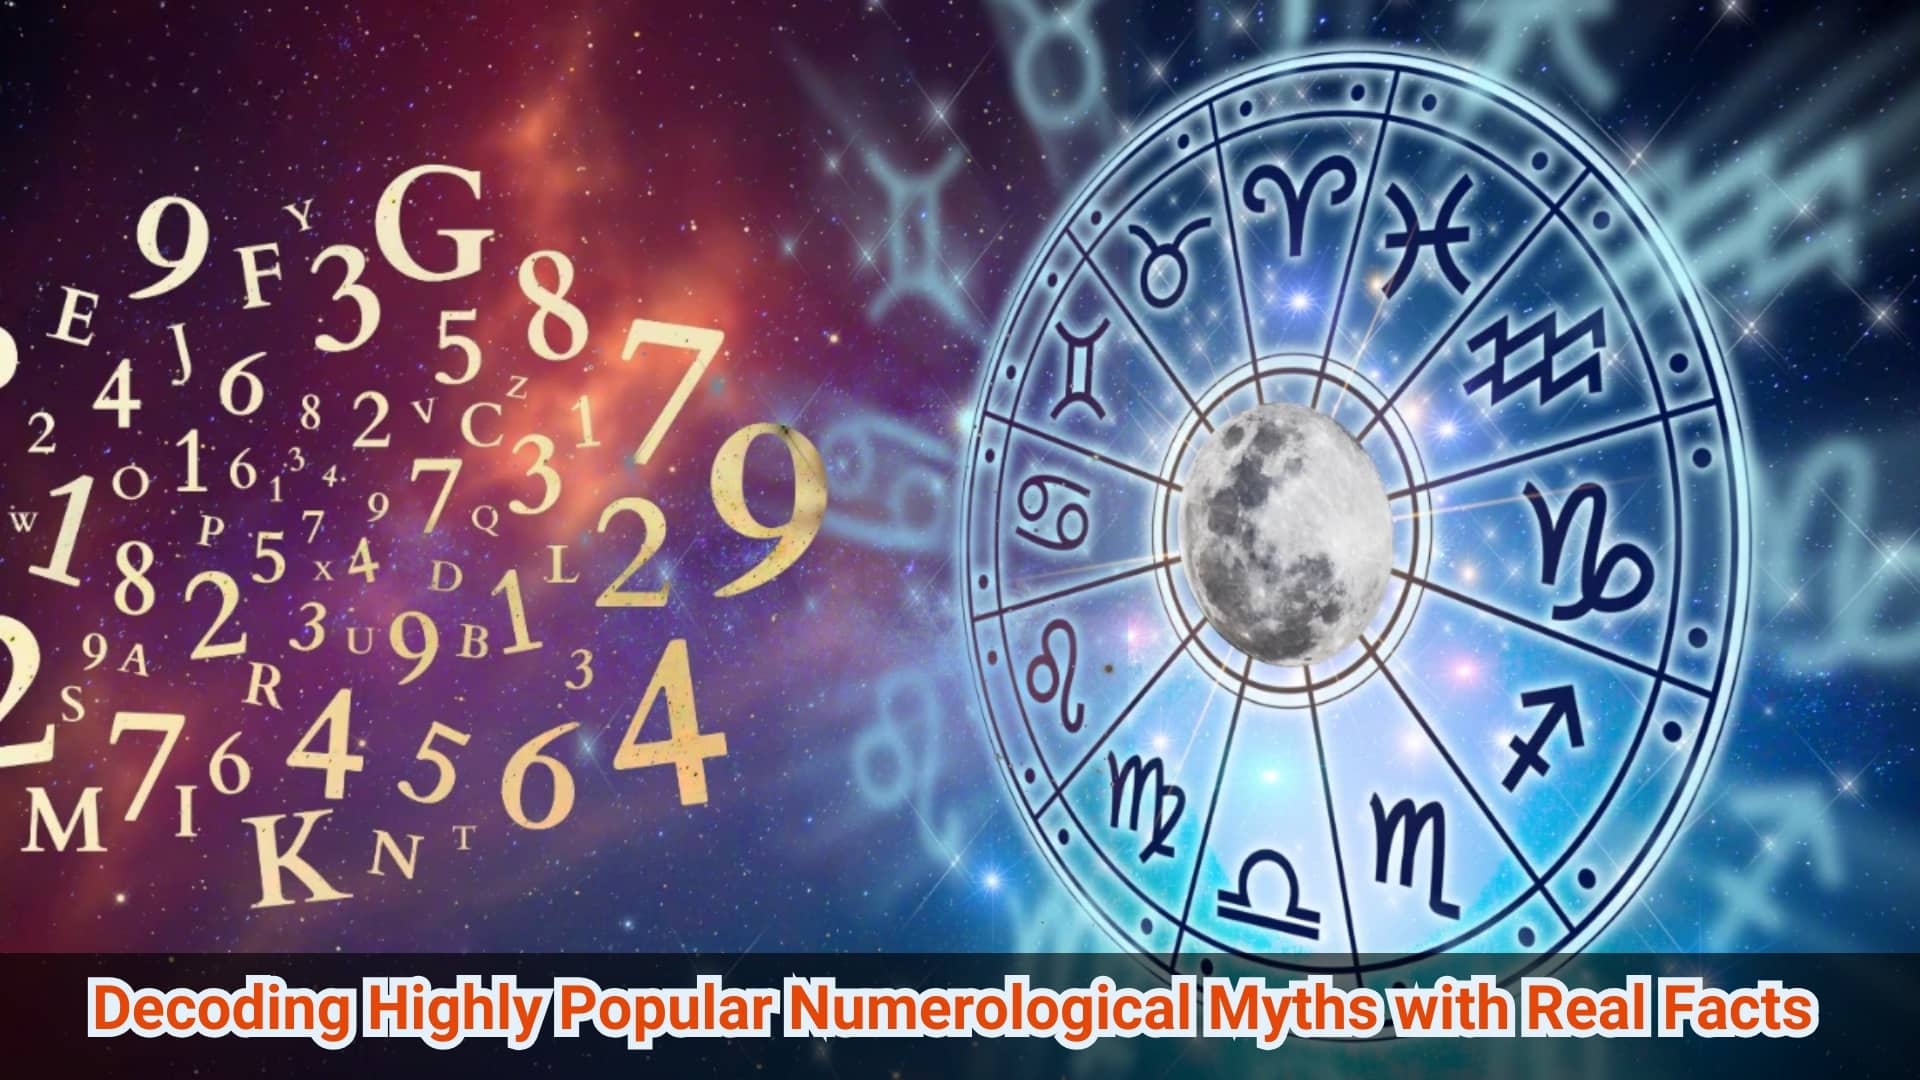 Decoding Highly Popular Numerological Myths with Real Facts